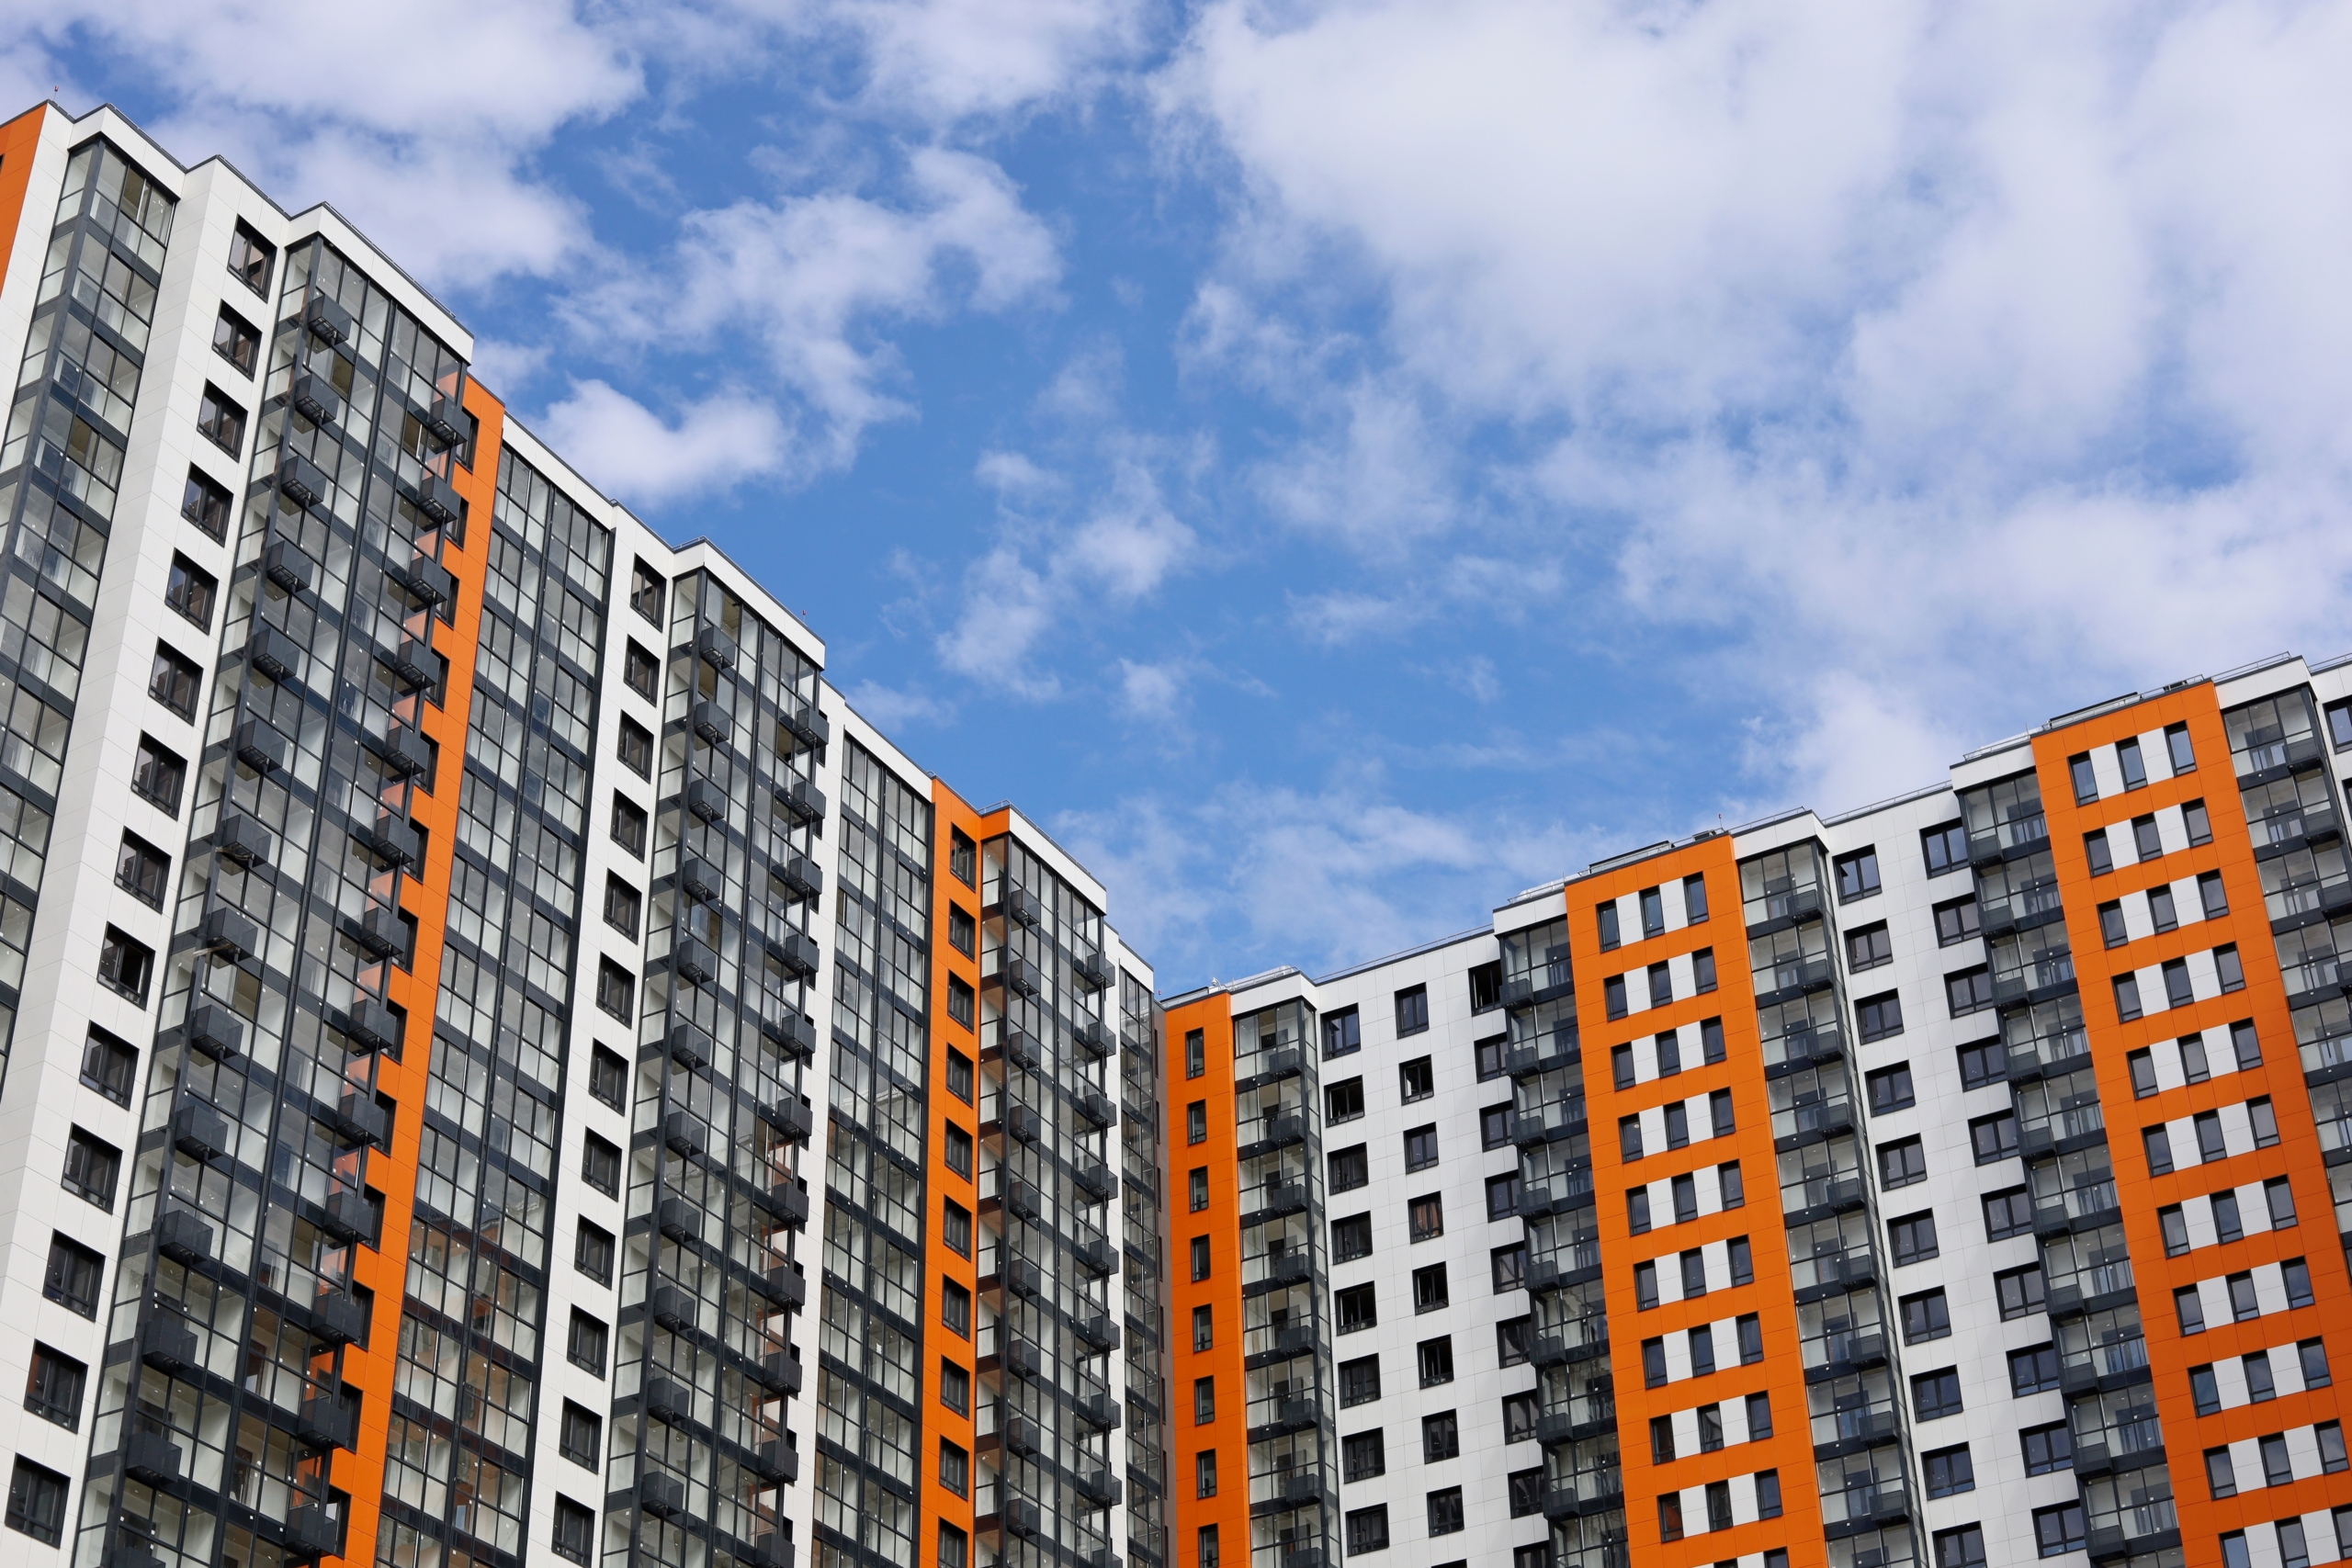 New,Residential,Building,With,Orange,And,White,Cladding,Against,Blue